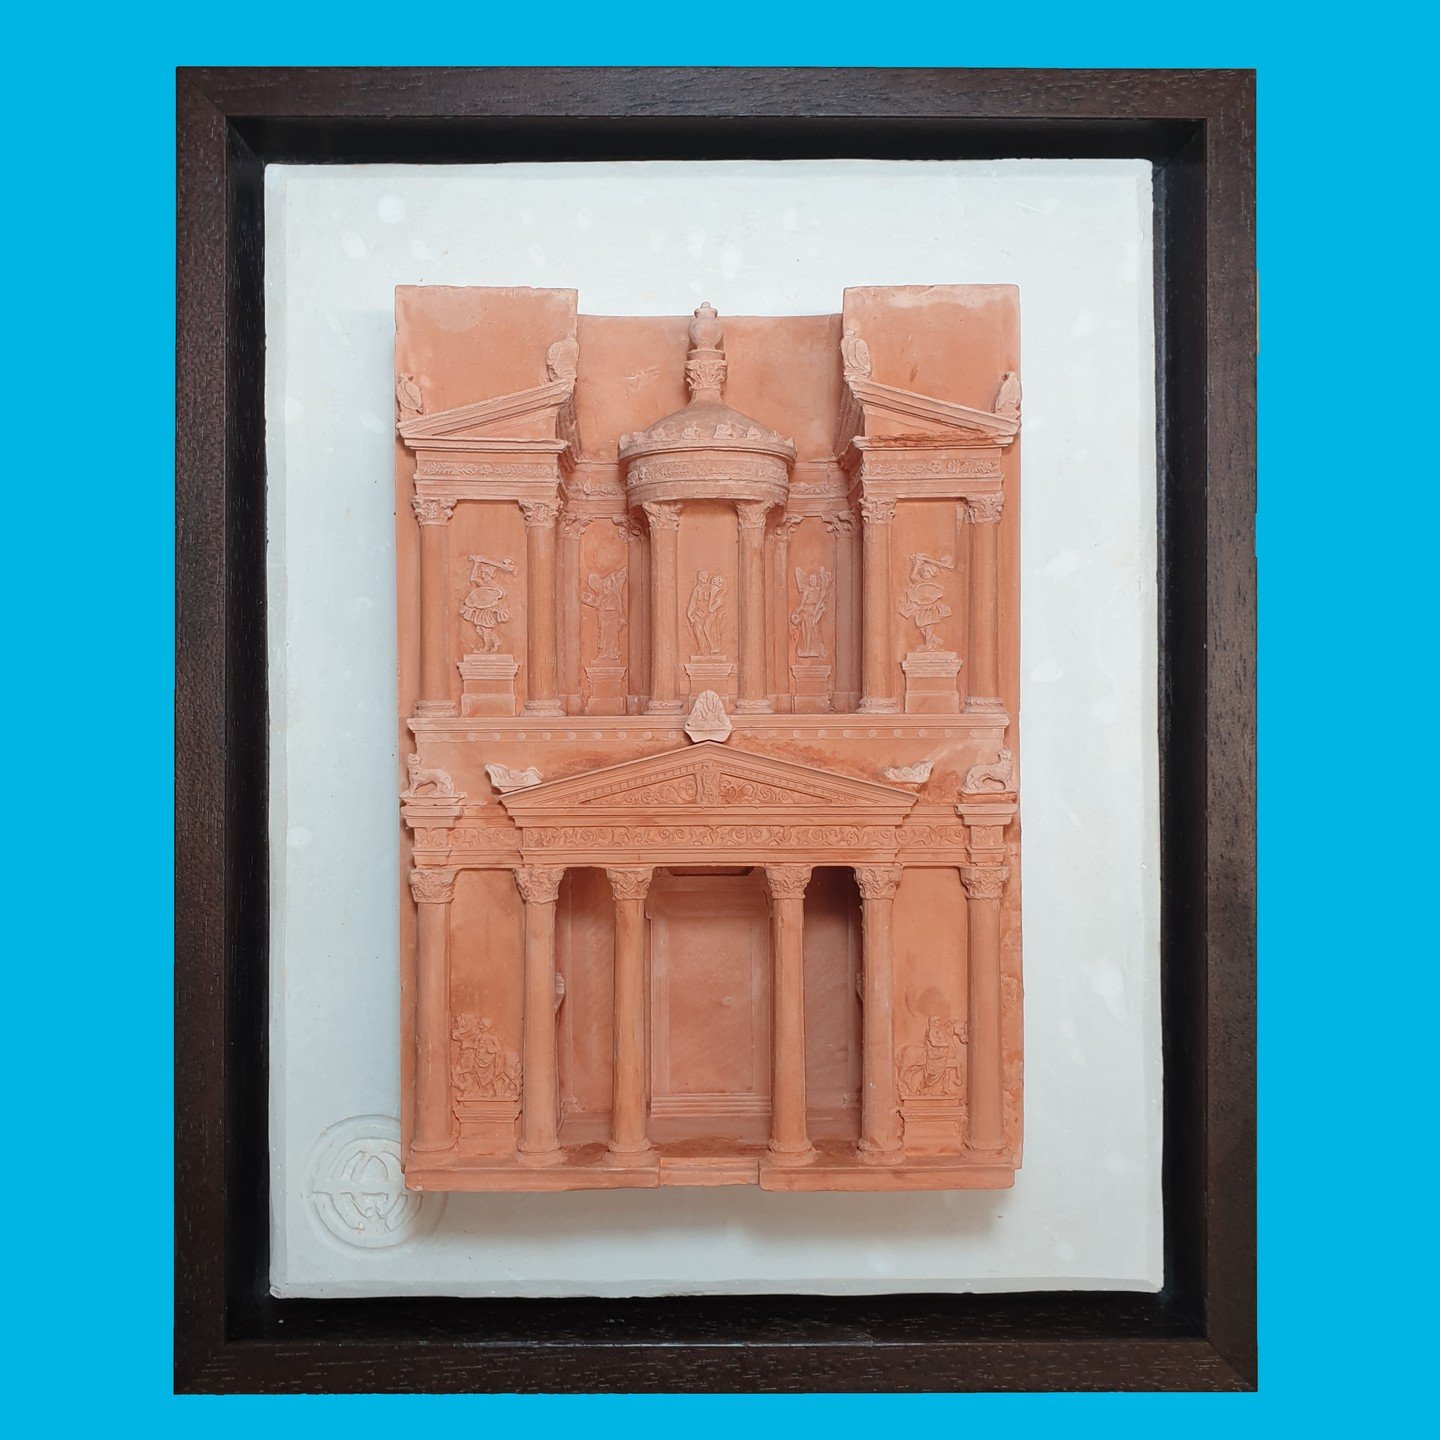 LIMITED EDITION ALERT. Al-Khazneh in Sandstone.

I am very pleased to announce that I have cracked the formula and am able to offer a limited edition of just 10 copies of Petra in this rich sandstone colour.

Available framed or unframed, each will i